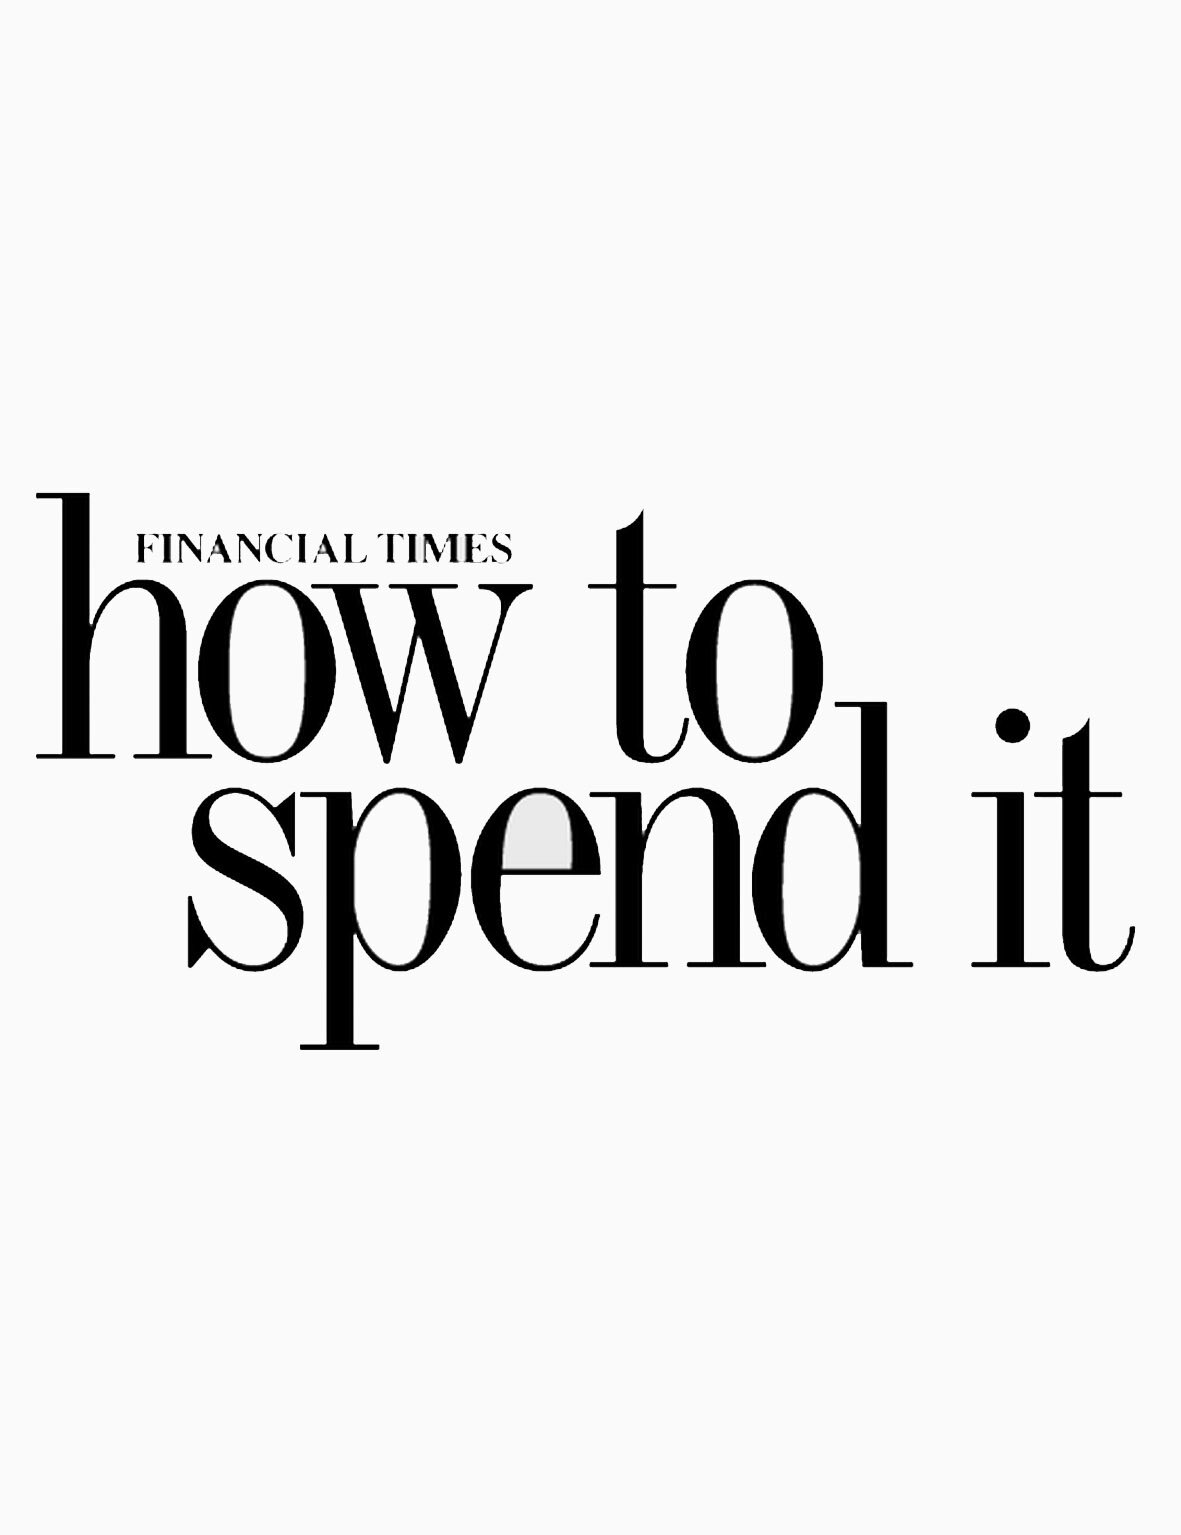 HOW TO SPEND IT, JUN 2017